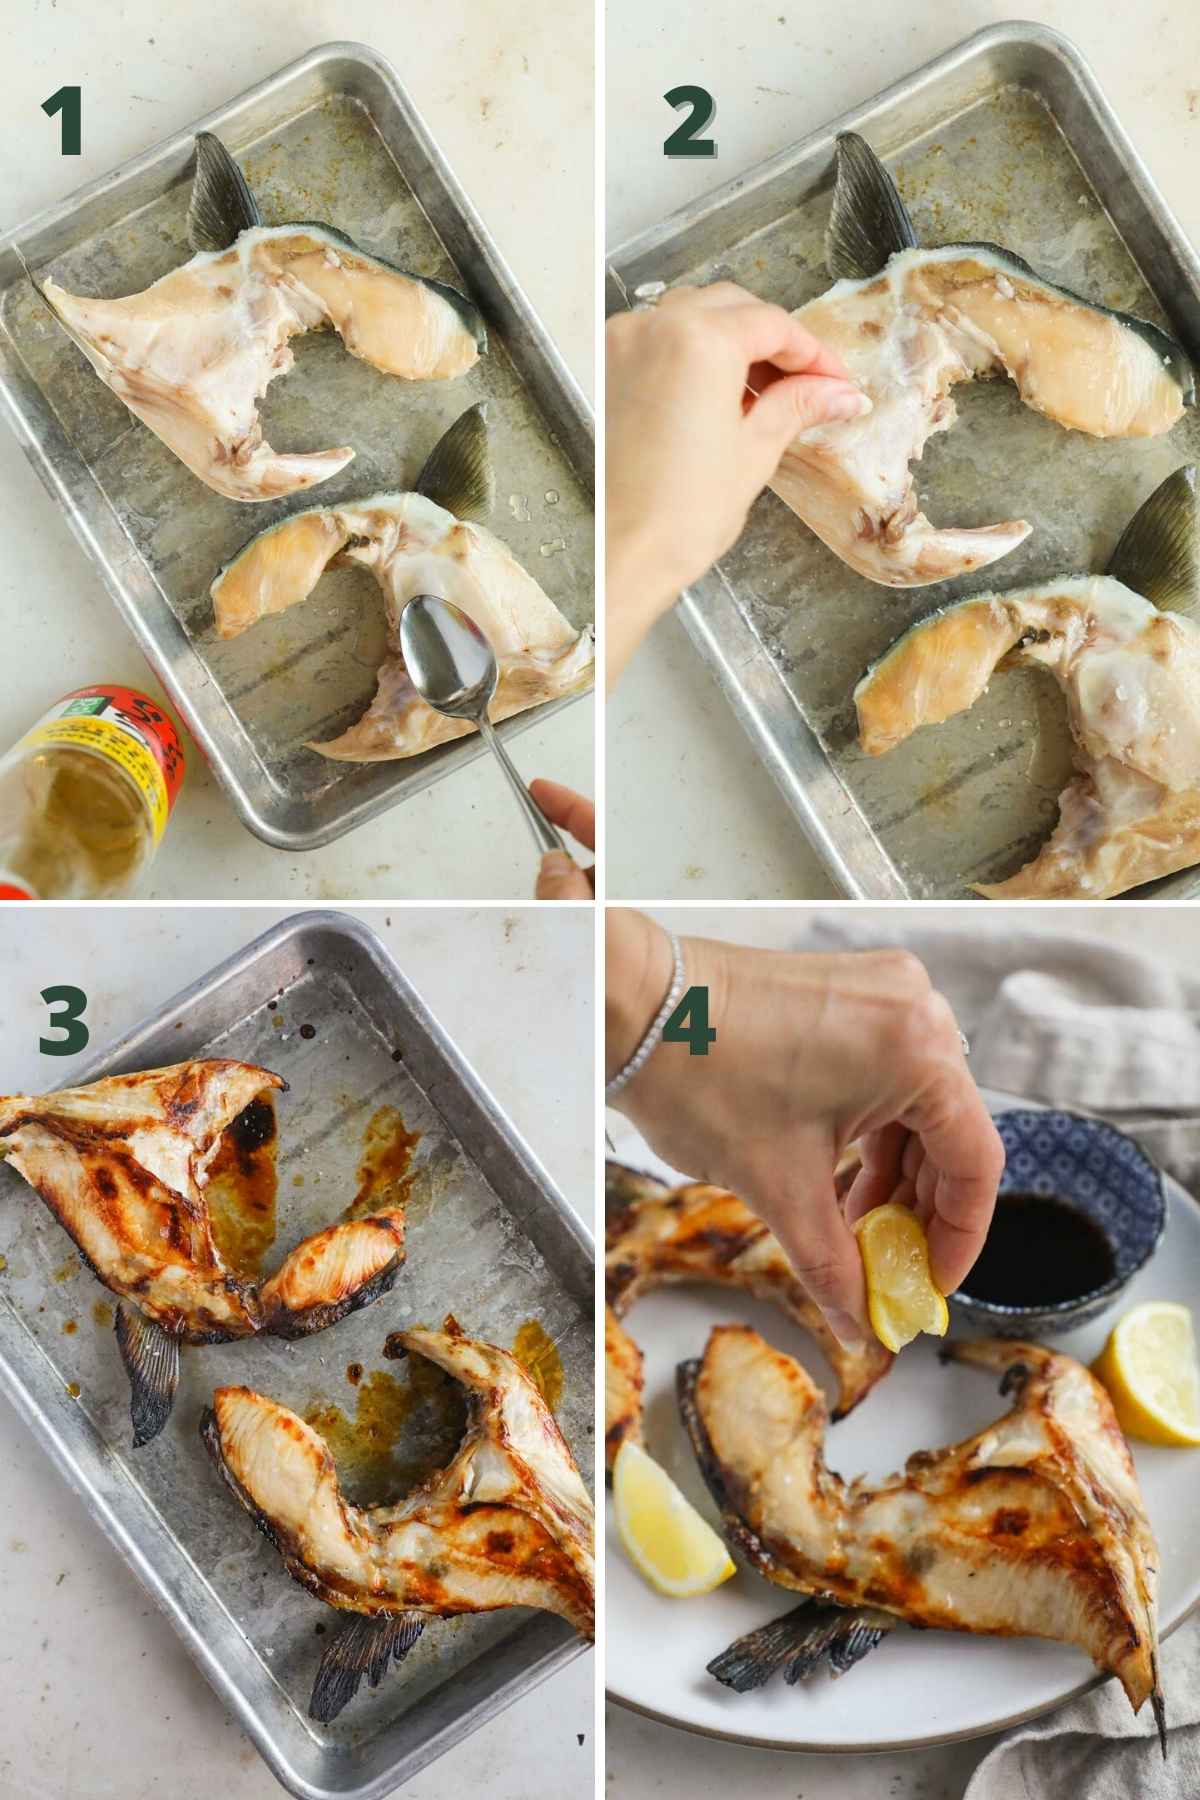 Steps to make hamachi kama, including placing the yellowtail collars on the sheet pan, rubbing with mirin, seasoning with sea salt, broiling, and serving with lemon juice, yuzu ponzu, or soy sauce.